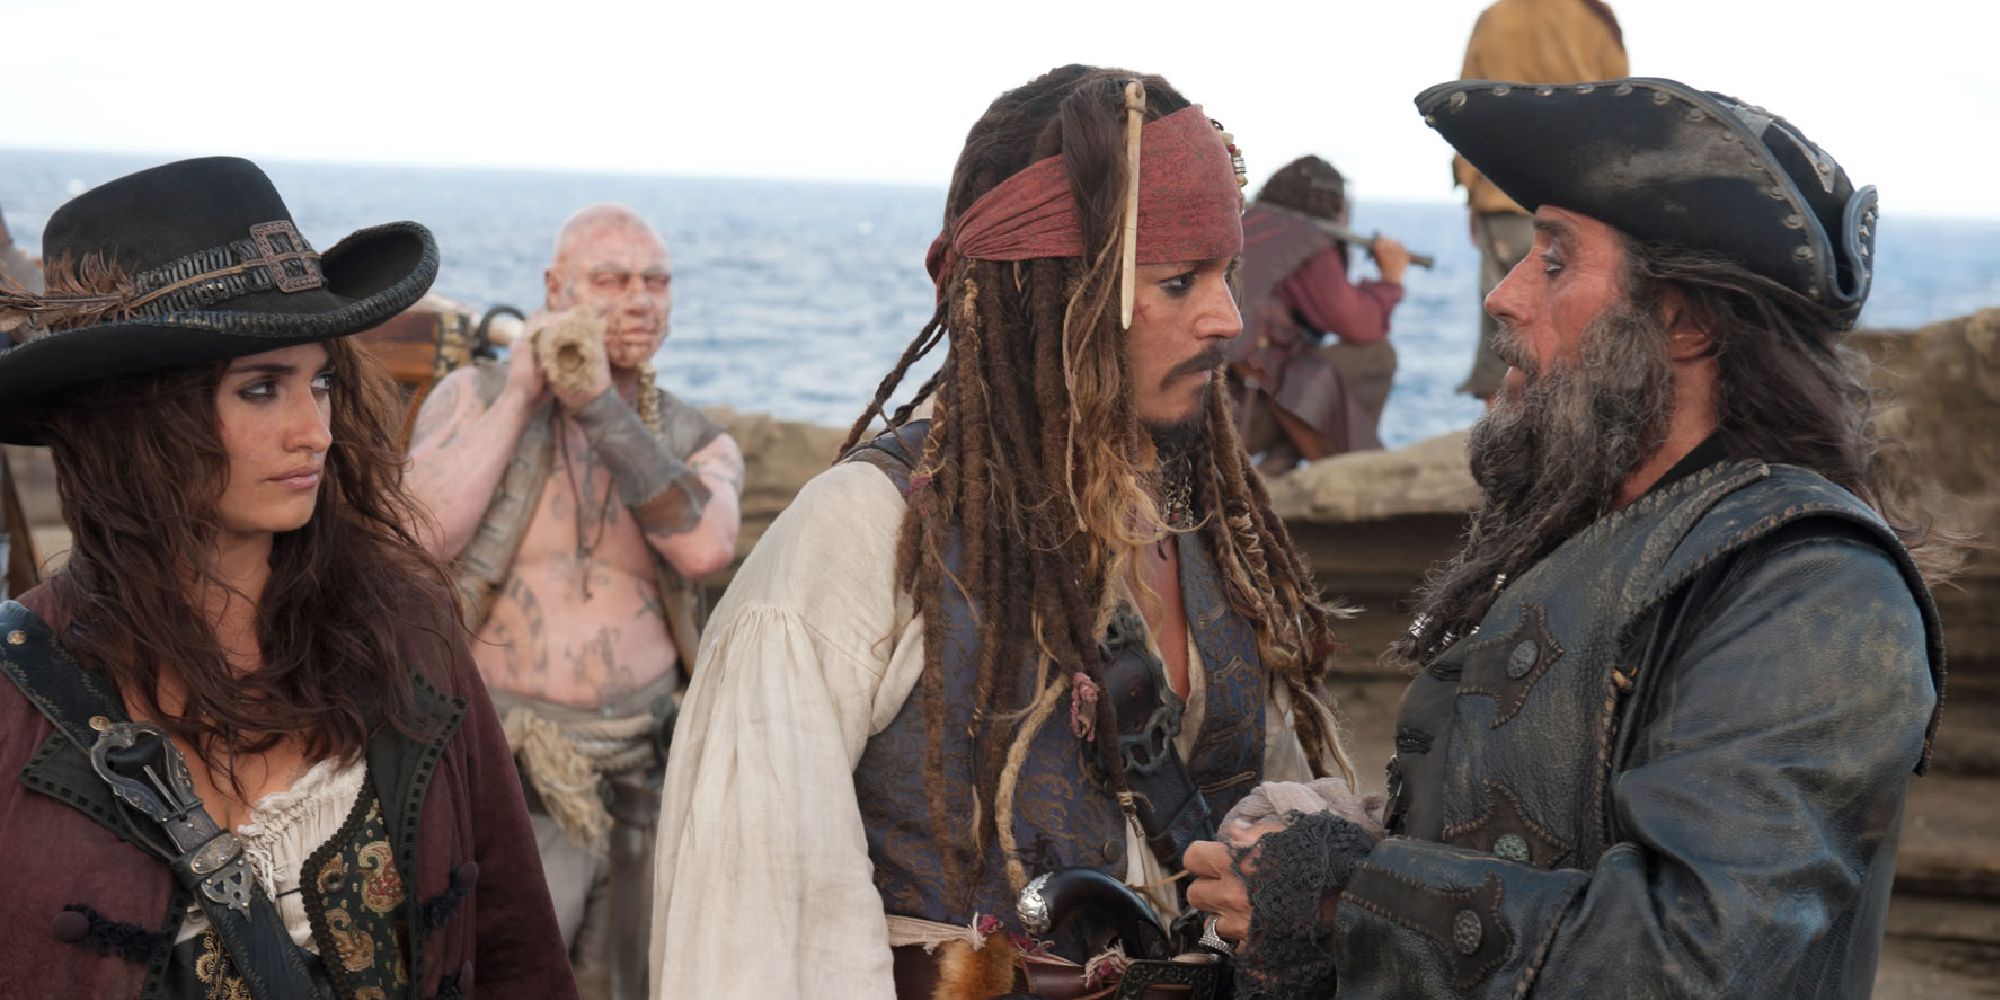 Penelope Cruz, Johnny Depp and Ian McShane in Pirates of the Caribbean On Stranger Tides